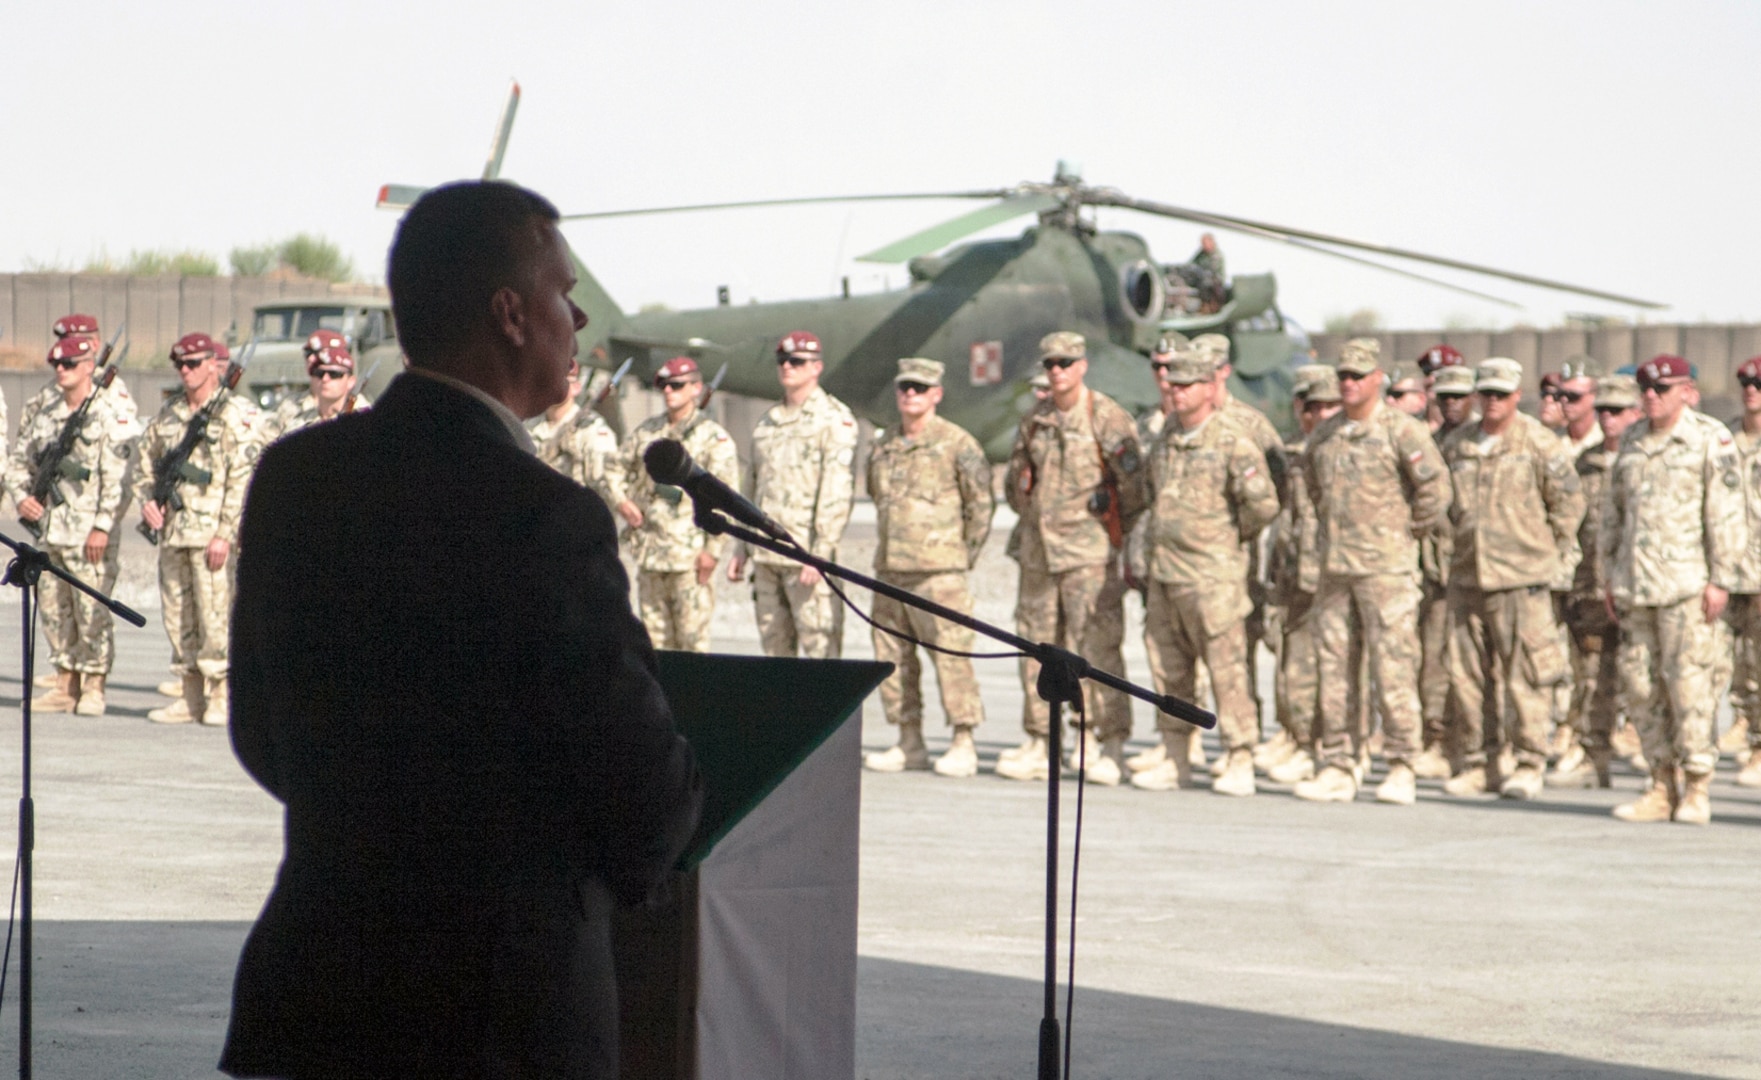 Illinois National Guard Soldiers stand in formation with their Polish brothers in arms as Tomasz Siemoniak, Poland's minister of national defense, addresses Soldiers of Task Force White Eagle.